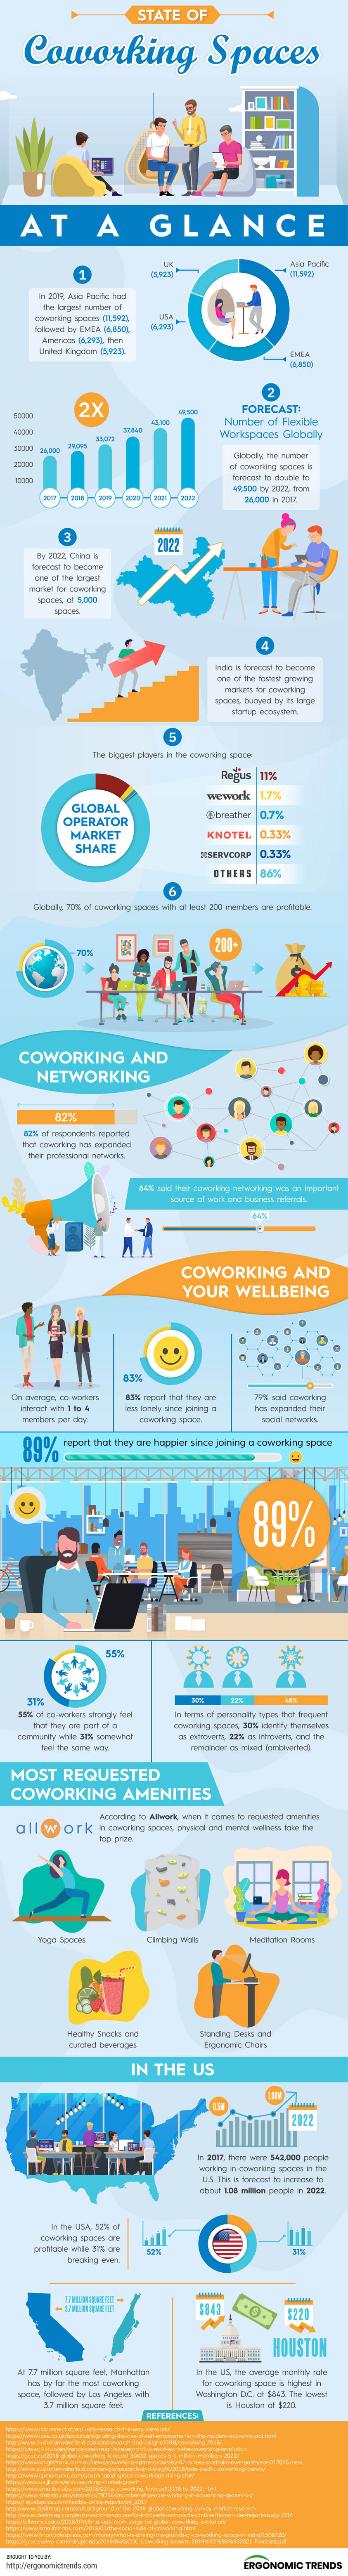 32 Awesome Coworking Space Statistics That Will Surprise and Inspire You